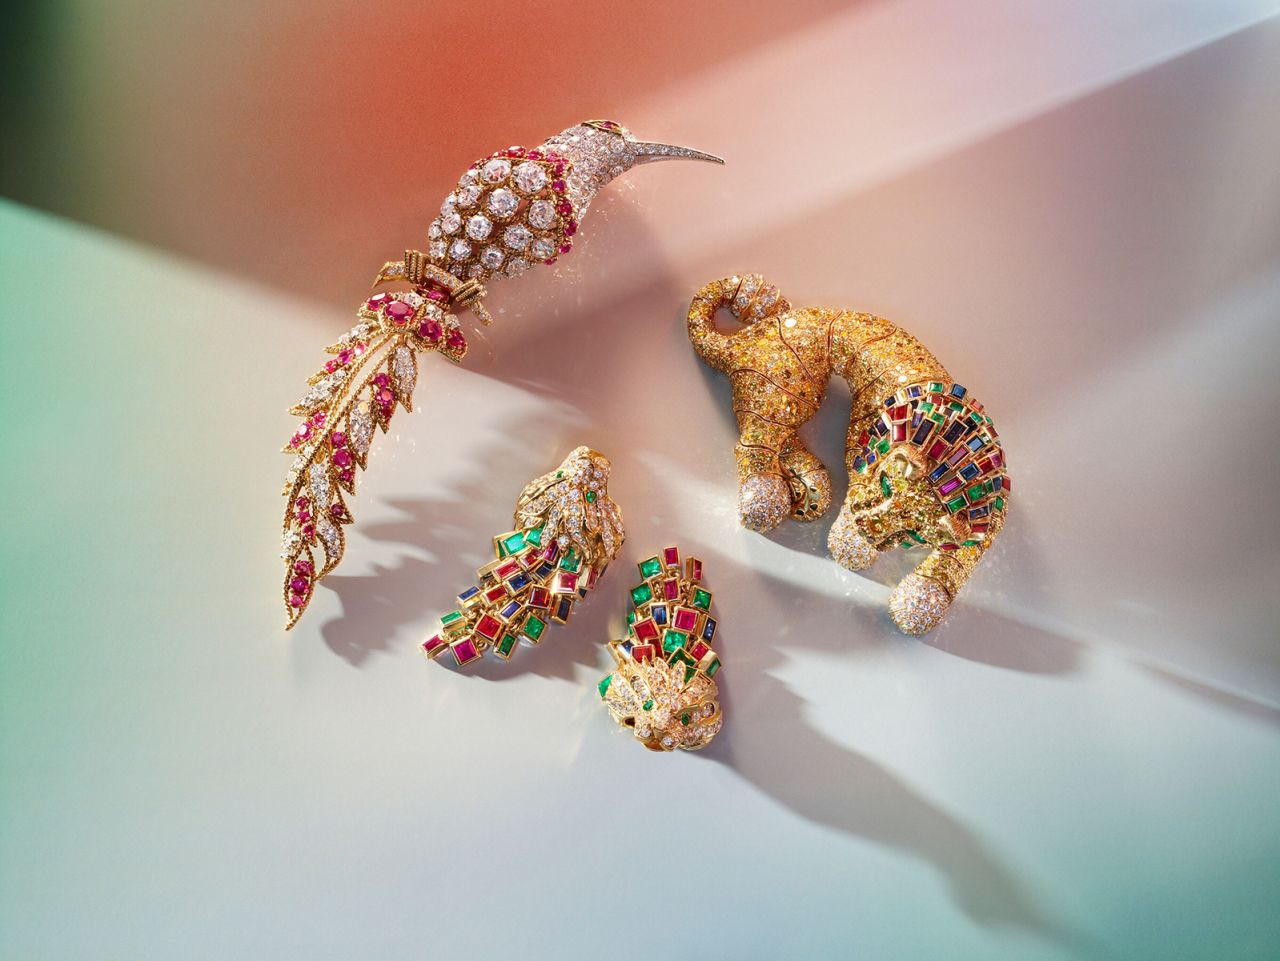 A Van Cleef & Arpels ruby and diamond "Bird of Paradise" brooch, a René Boivin multi-gem lion brooch and a pair of unsigned lionhead earrings.